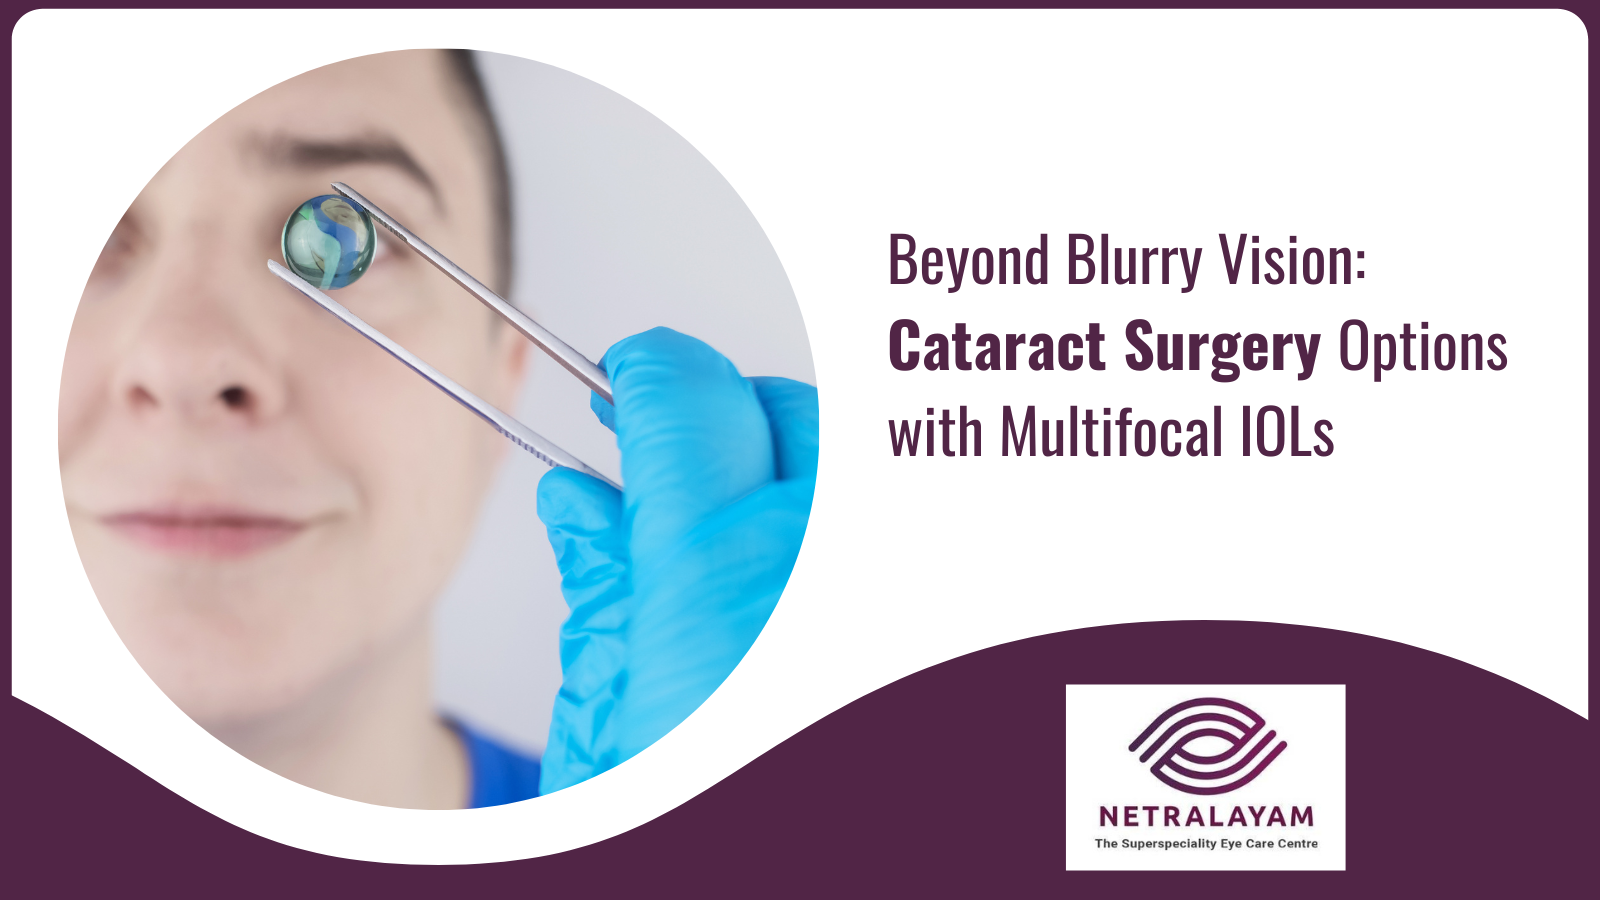 Beyond Blurry Vision: Cataract Surgery Options with Multifocal IOLs